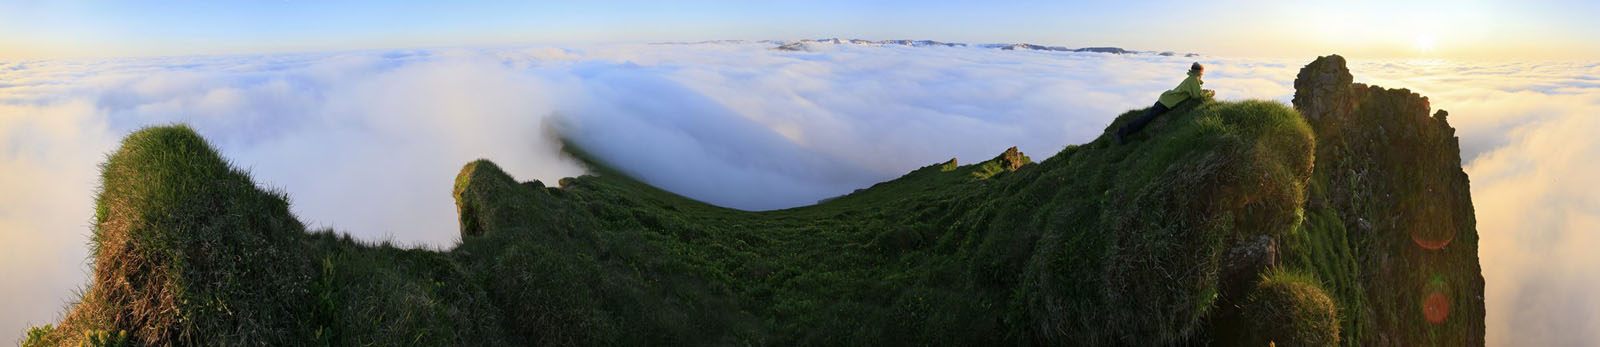 A hiker above the clouds at around 1am on a coastal mountain on the Hornstrandir Peninsula of the Westfiords region of Iceland...